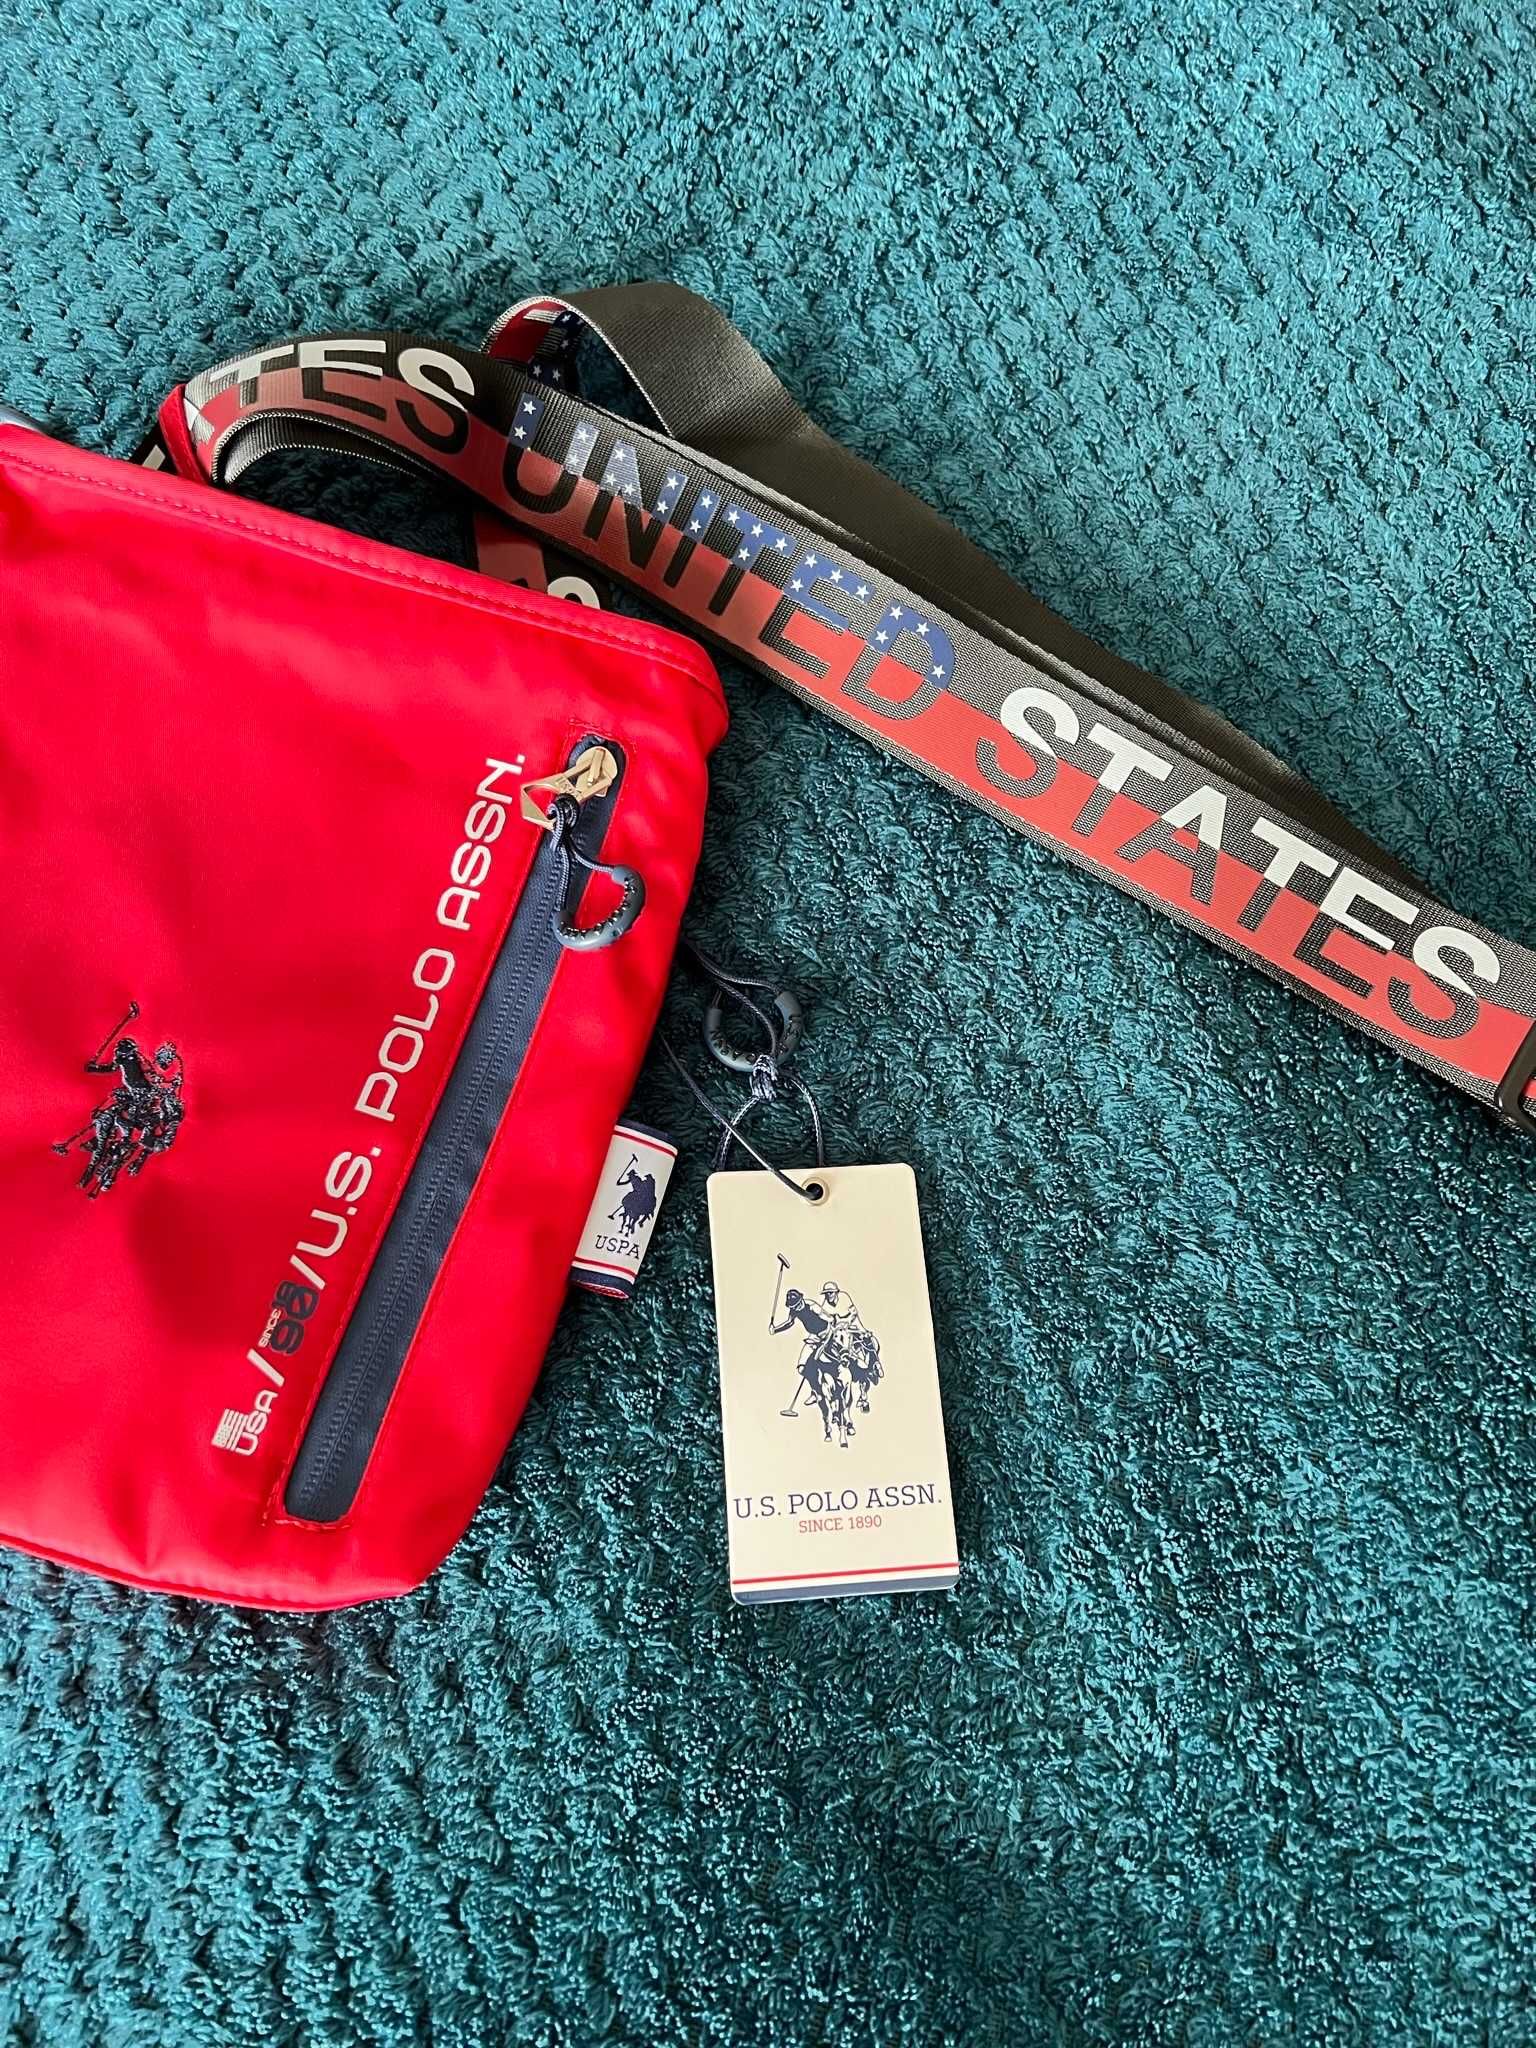 U.S. POLO ASSN. Bodybag Red Limited  - ORIGINAL BY U.S.A